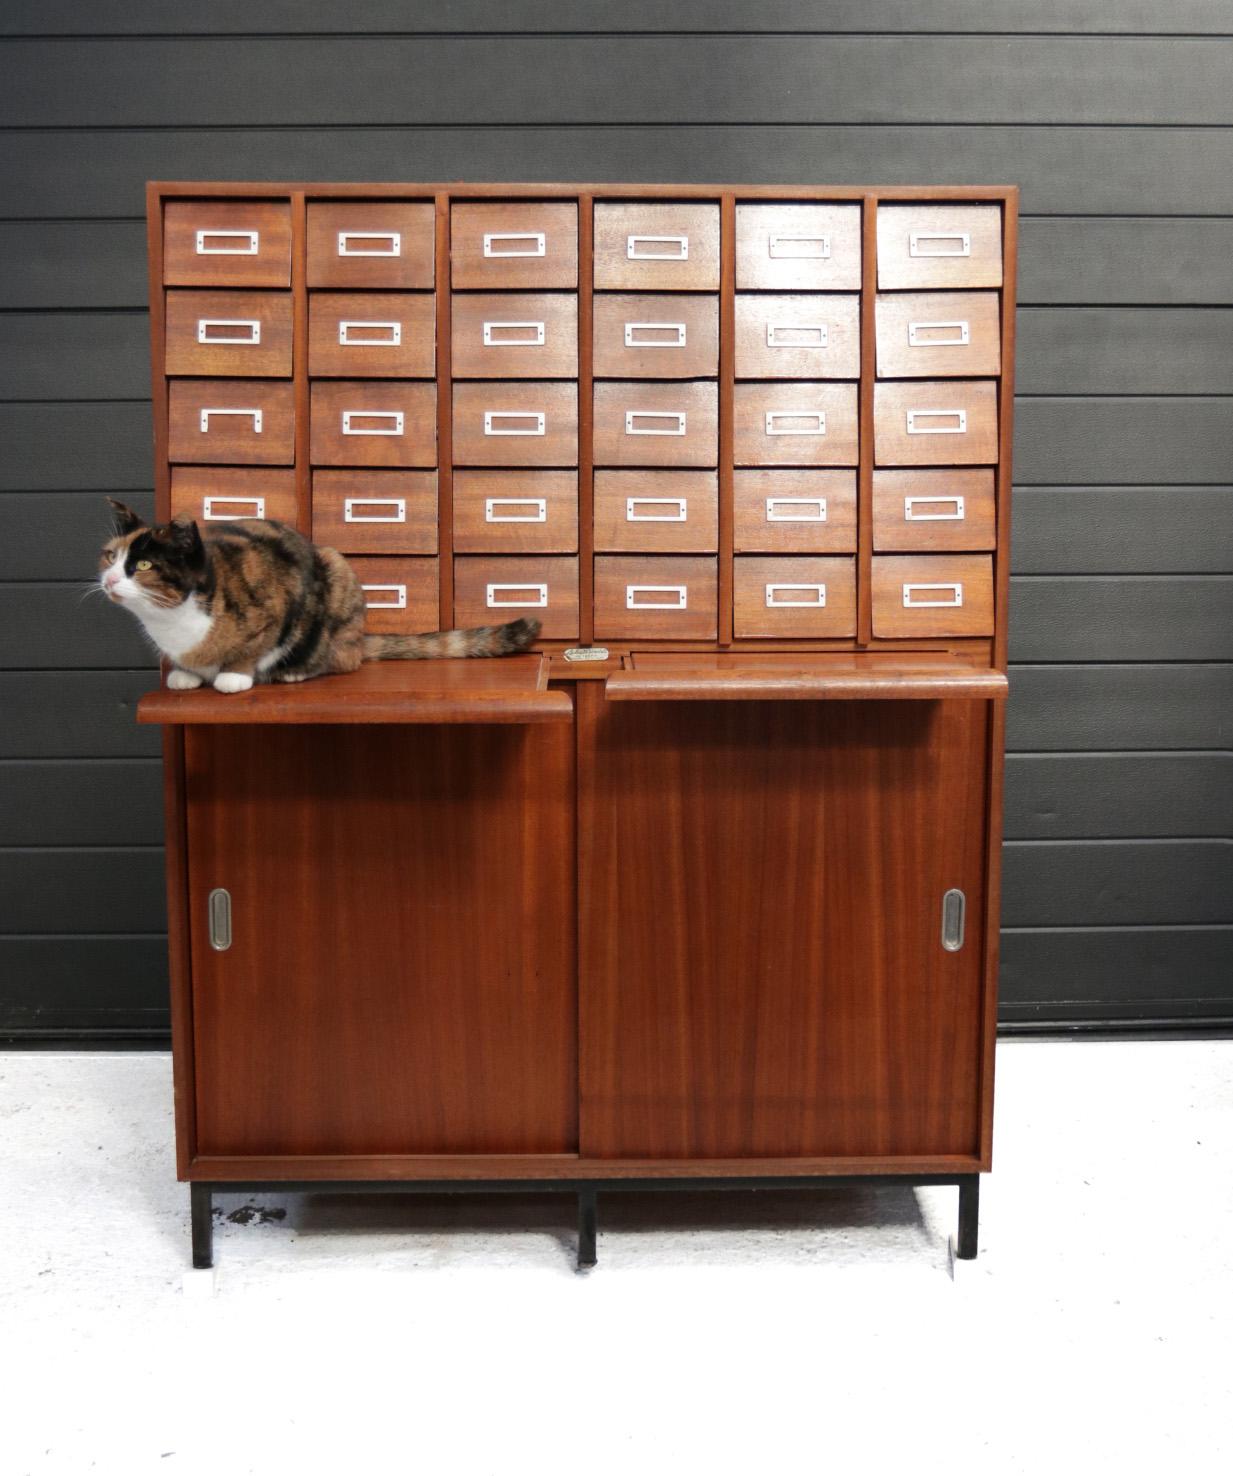 Rare Mid-Century Modern pharmacy cabinet with 30 drawers.
There are two pull-out shelves under the drawers.
At the bottom 2 sliding doors with 2 shelves behind them.
Very beautifully designed, partly made of teak wood veneer, partly of solid